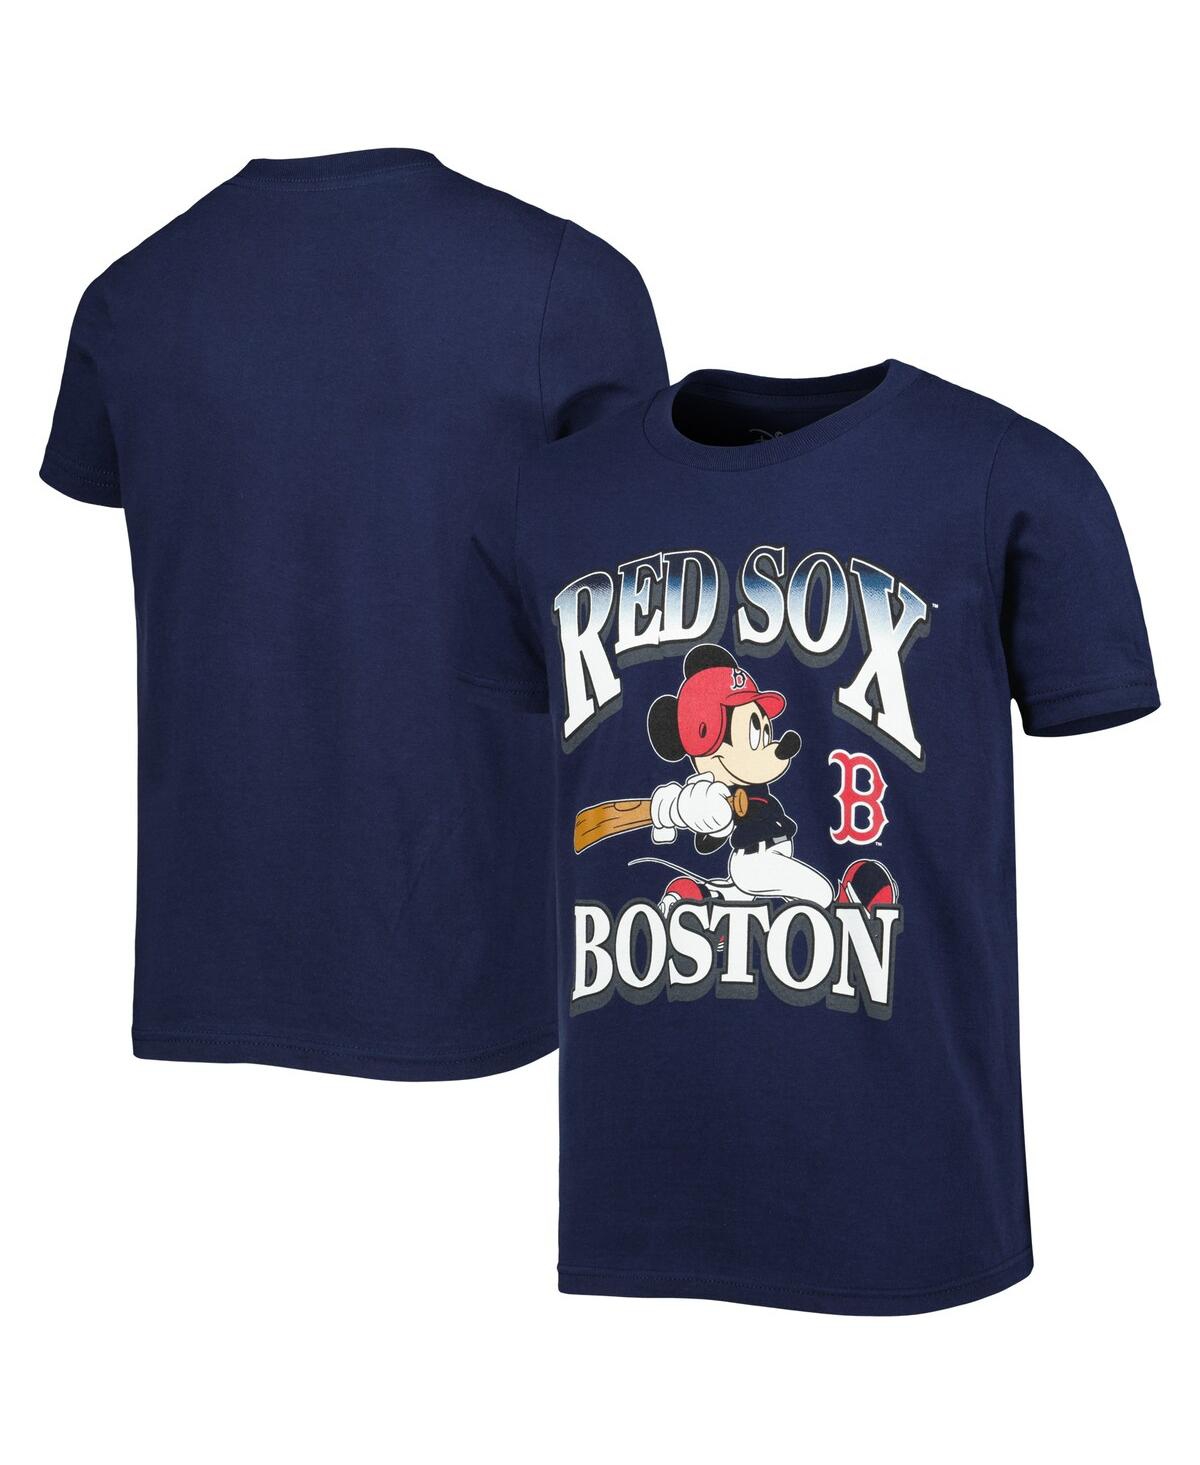 Outerstuff Kids' Big Boys And Girls Navy Boston Red Sox Disney Game Day T-shirt